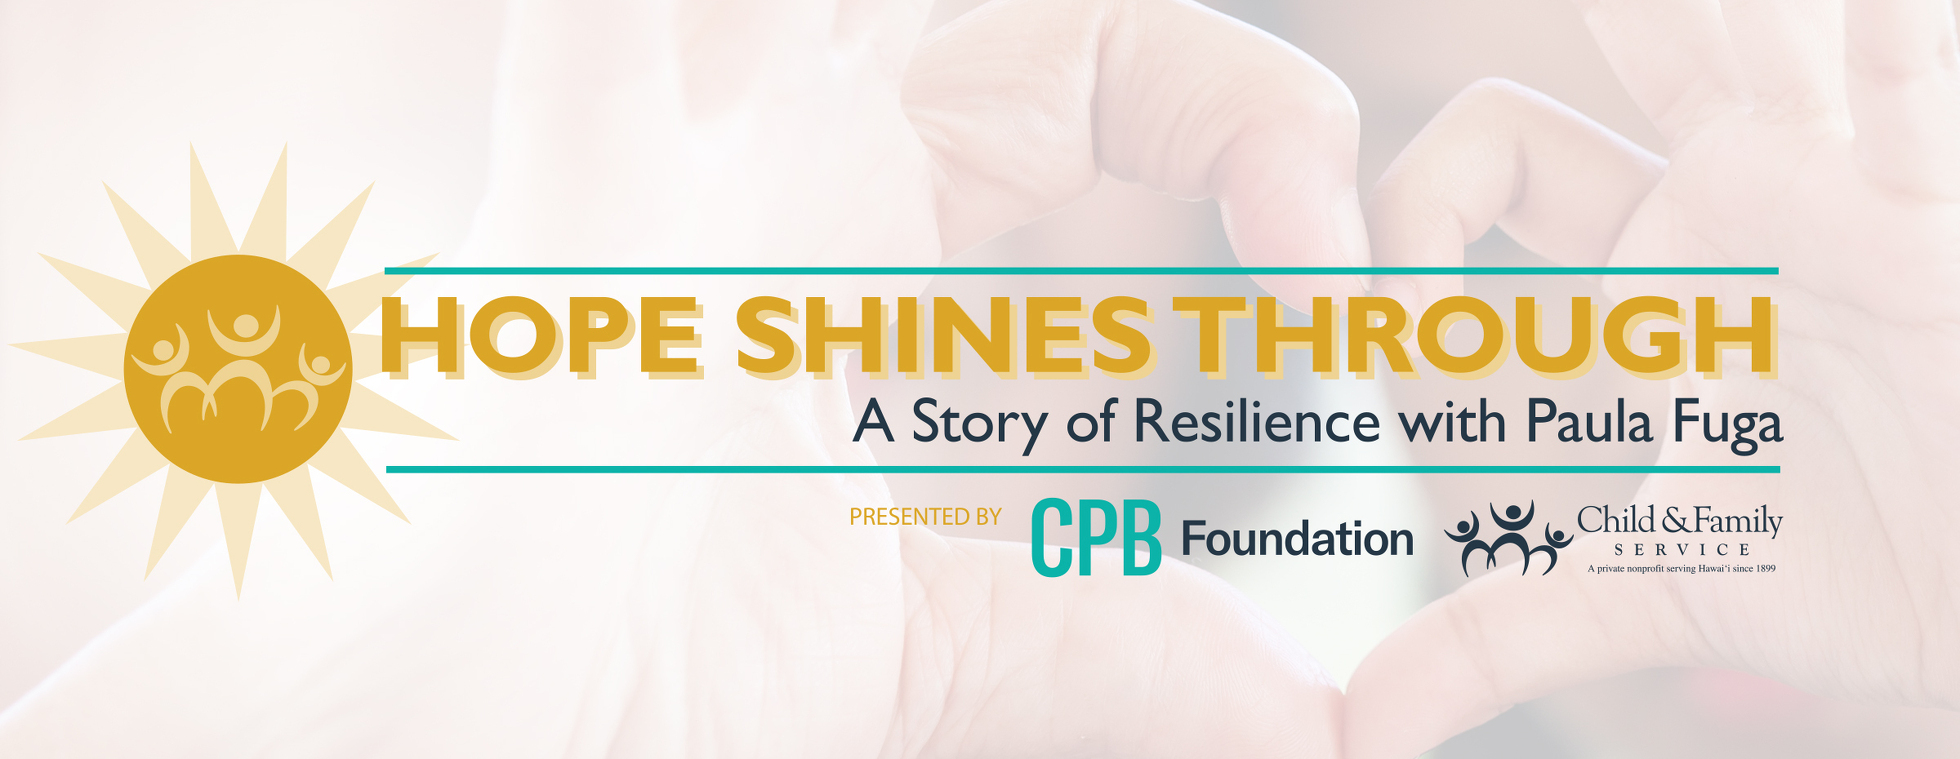 HOPE SHINES THROUGH: A Story of Resilience with Paula Fuga - presented by CPB Foundation and Child & Family Servicev